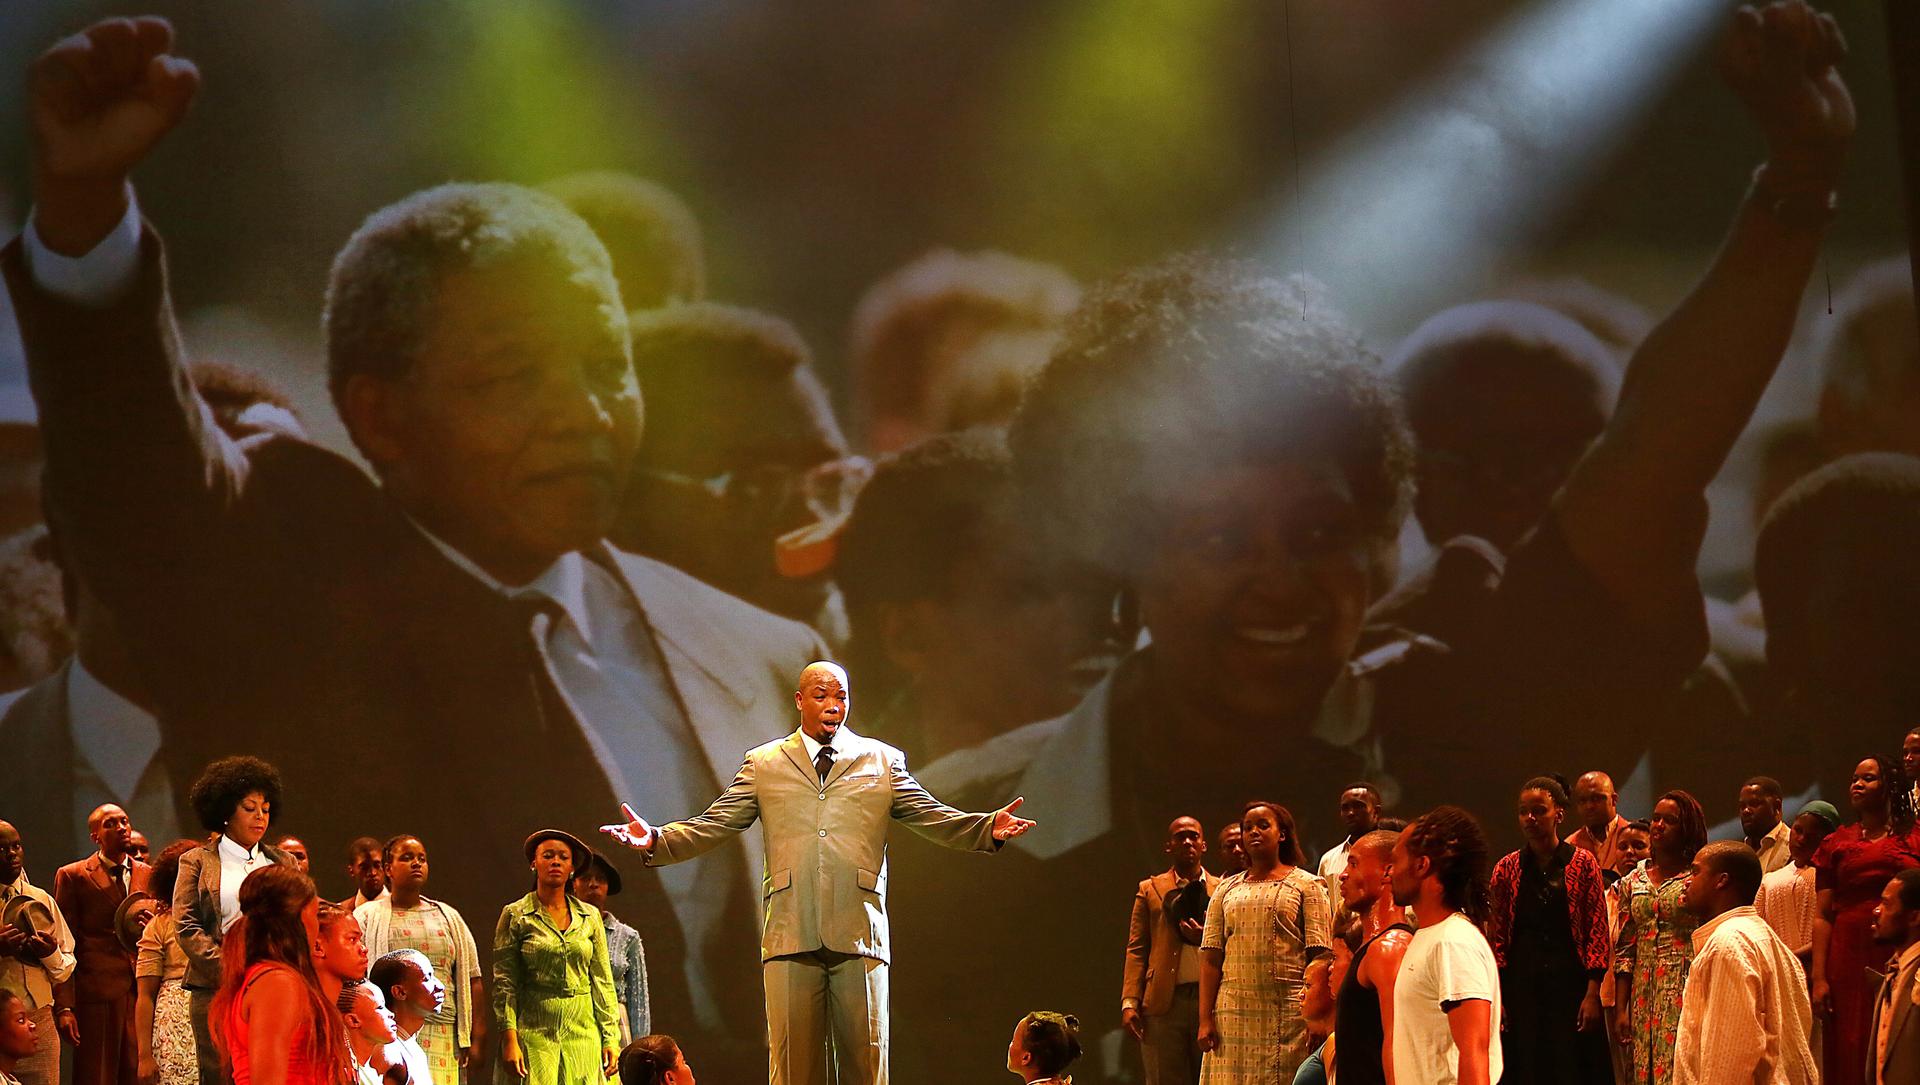 Thabang Senekal during a performance of "Madiba: The African Opera" at South Africa's State Theatre in Pretoria on May 22, 2014.  The opera focuses on Nelson Mandela's  upbringing in the rural town of Qunu on the Eastern Cape and how and why he left that 